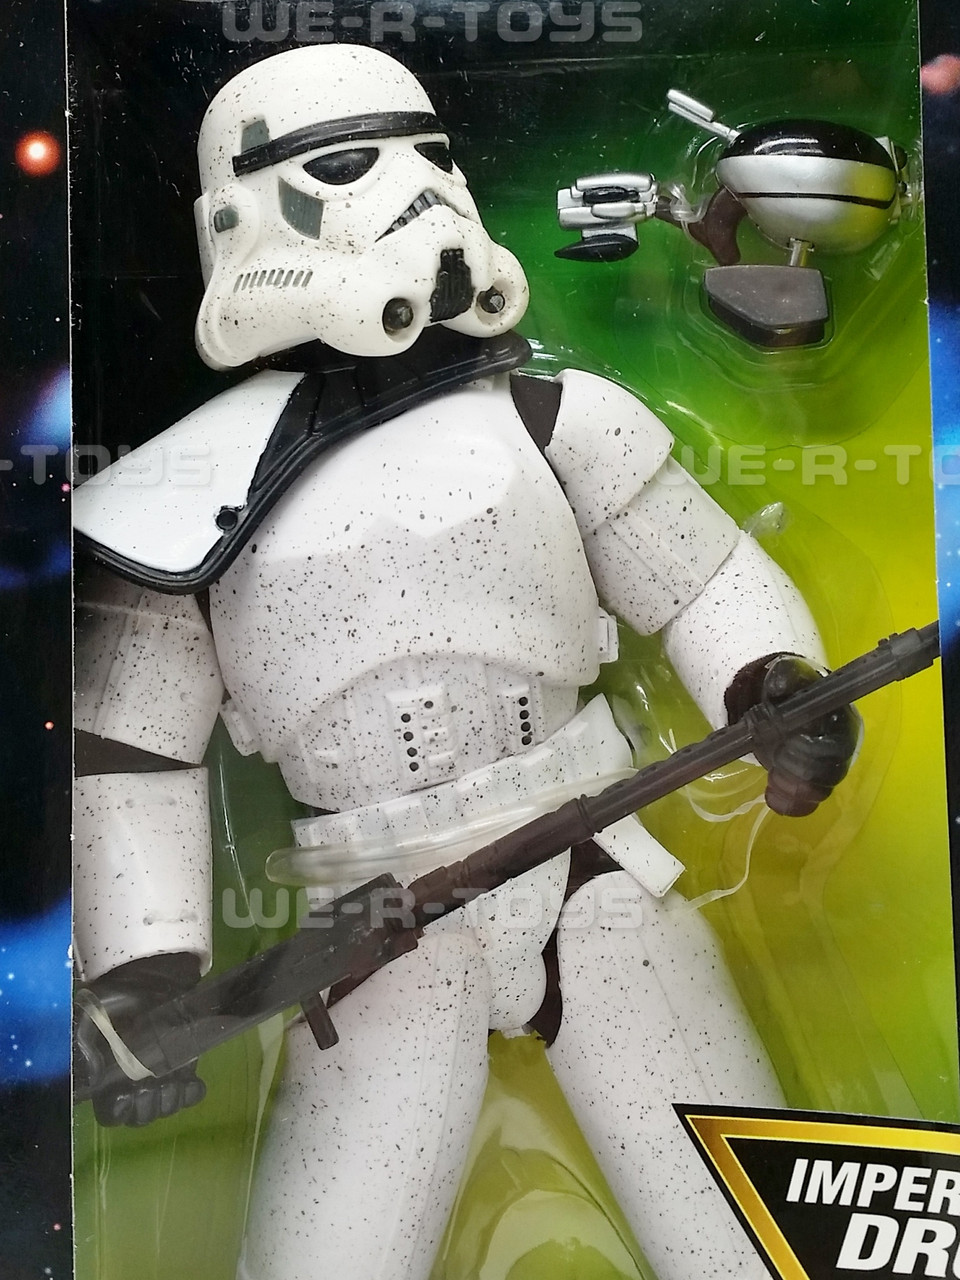 Kenner Star Wars 1997 Collection SANDTROOPER with Imperial Droid Action Figure for sale online